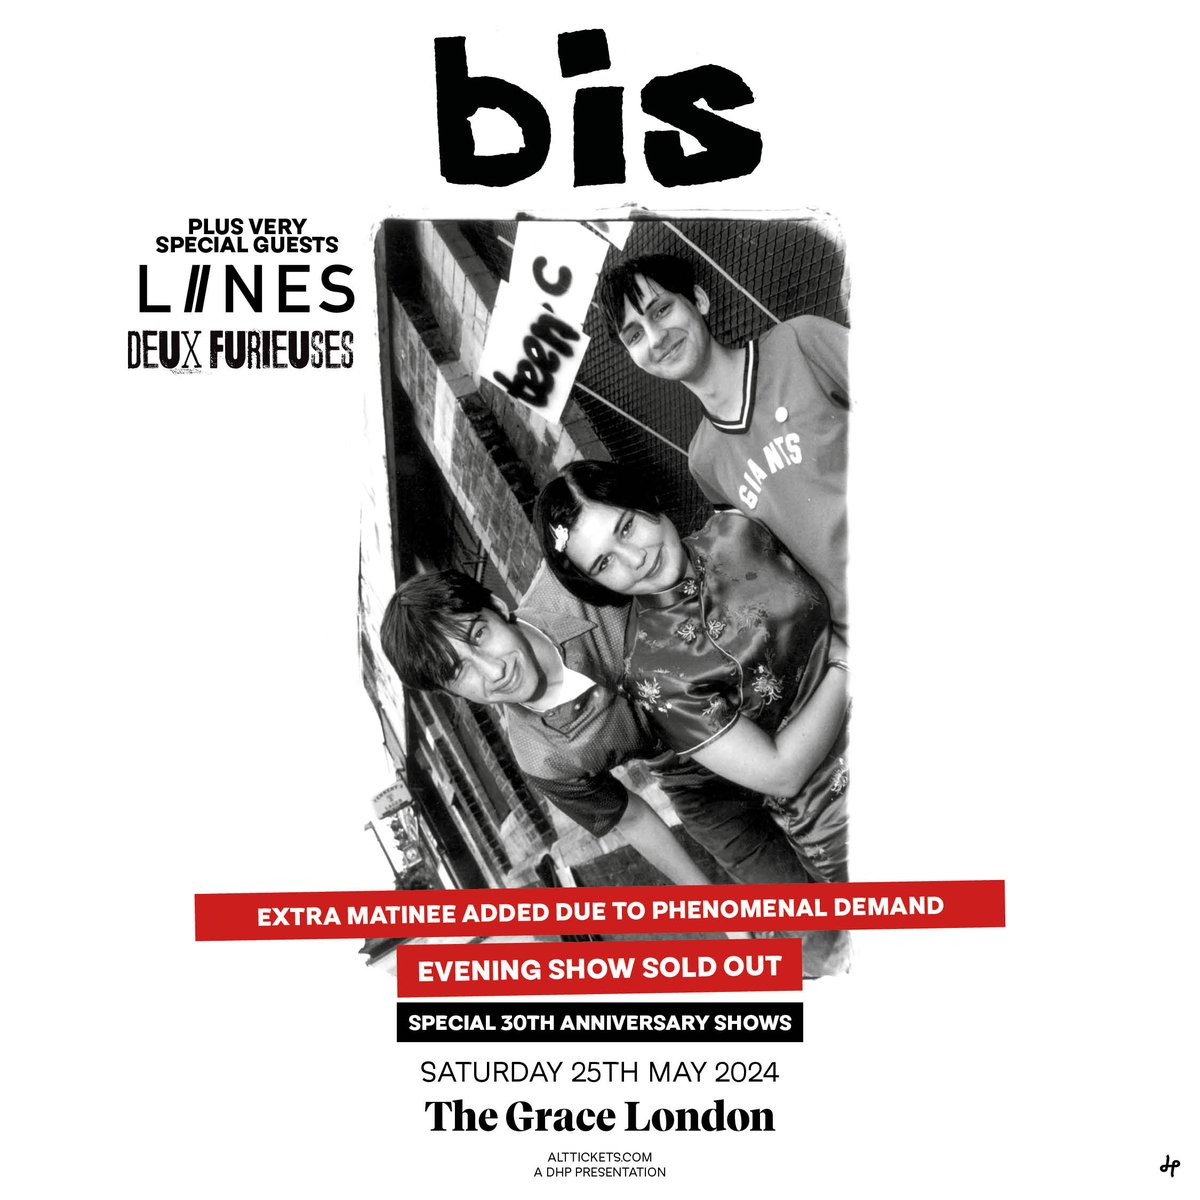 Delighted to join Glaswegian legends @thebandbis at their 30th Anniversary shows @thegraceldn Sat 25 May with @WEARELIINES! Manda once interviewed Ros about her band Shriek in her zine, great to play together again! Sold out, matinee tix only, doors 3pm! alttickets.com/bis-tickets/lo…